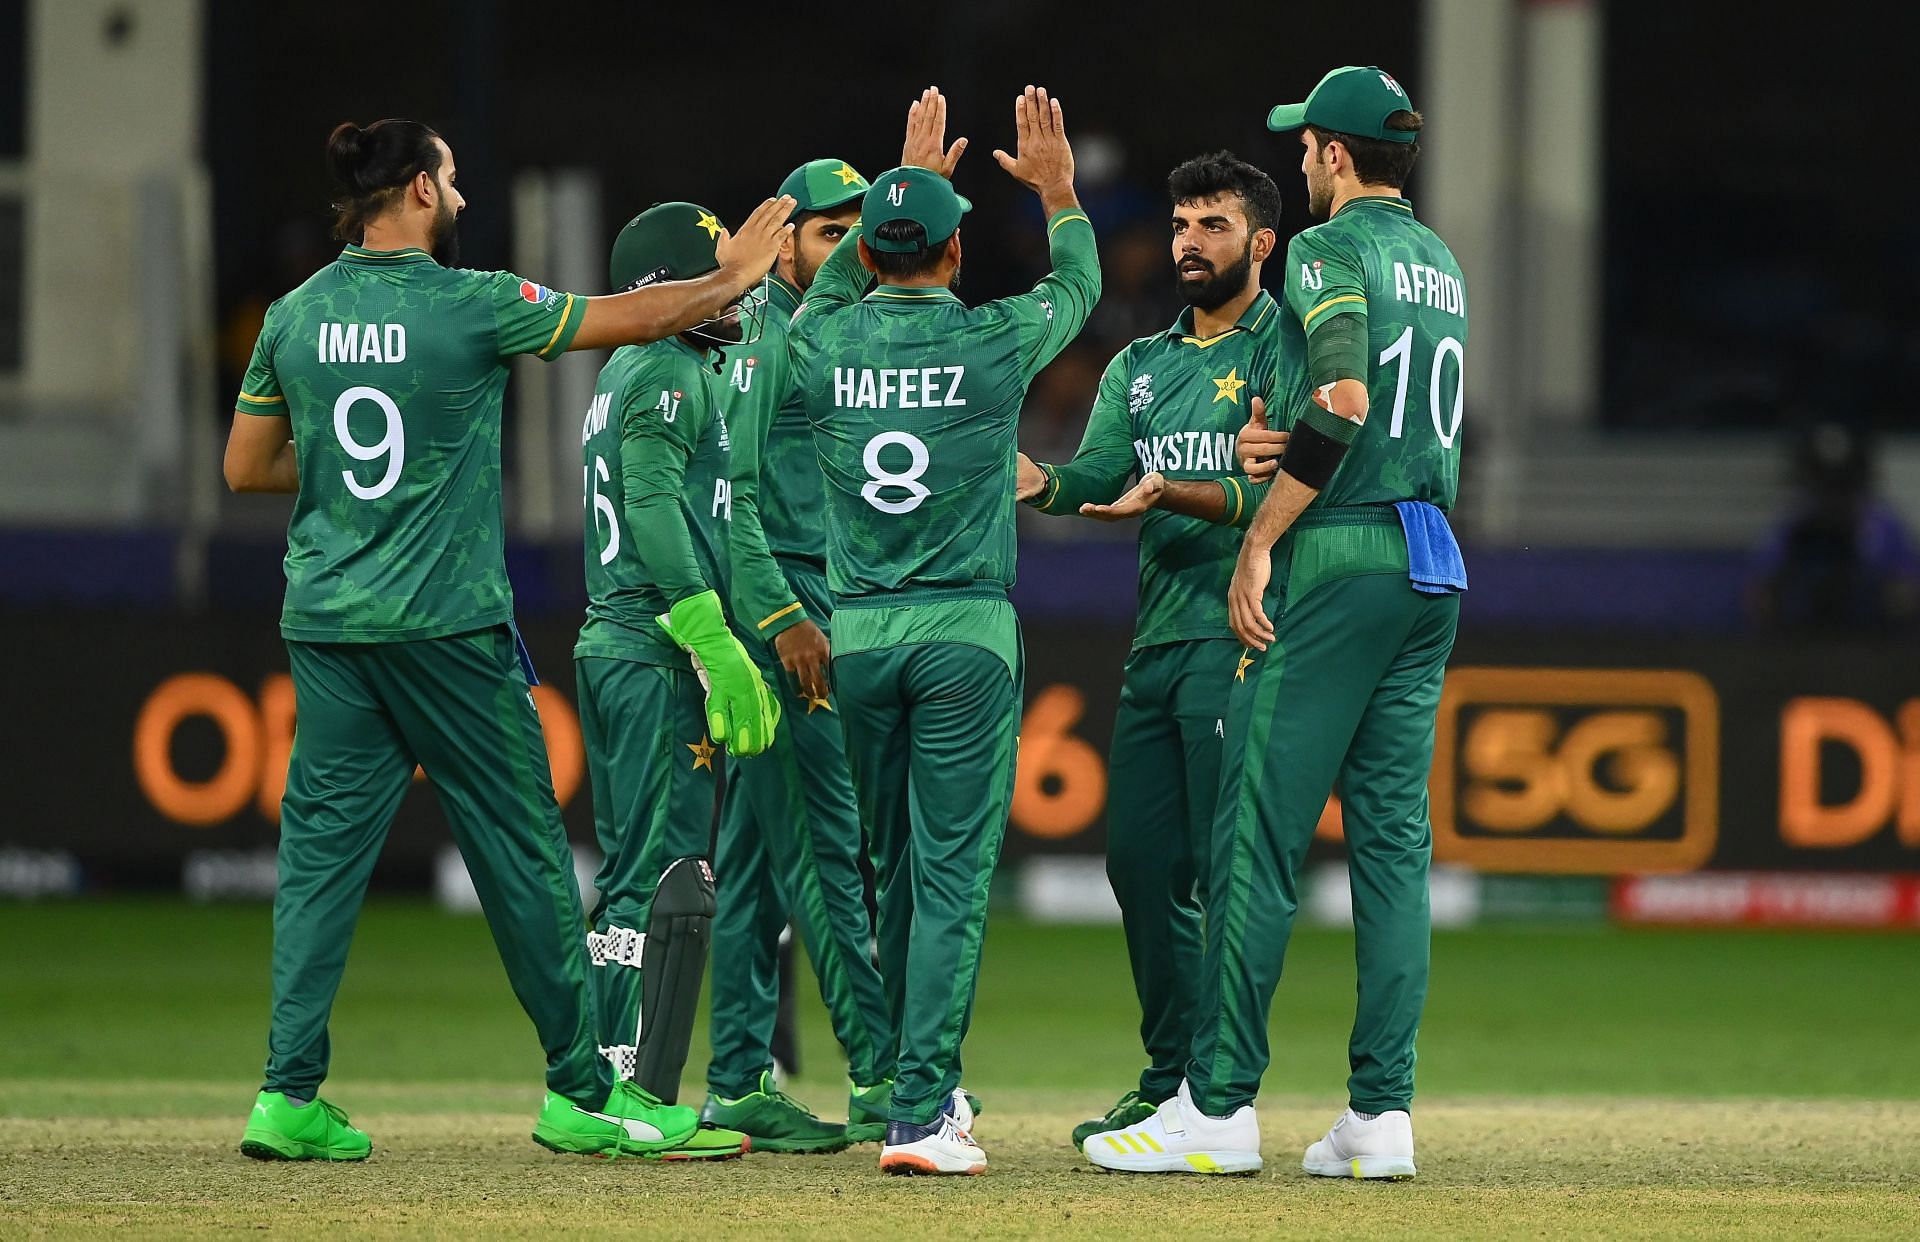 Pakistan will face Bangladesh for the first time after shocking exit from T20 World Cup (Credit: Getty Images)